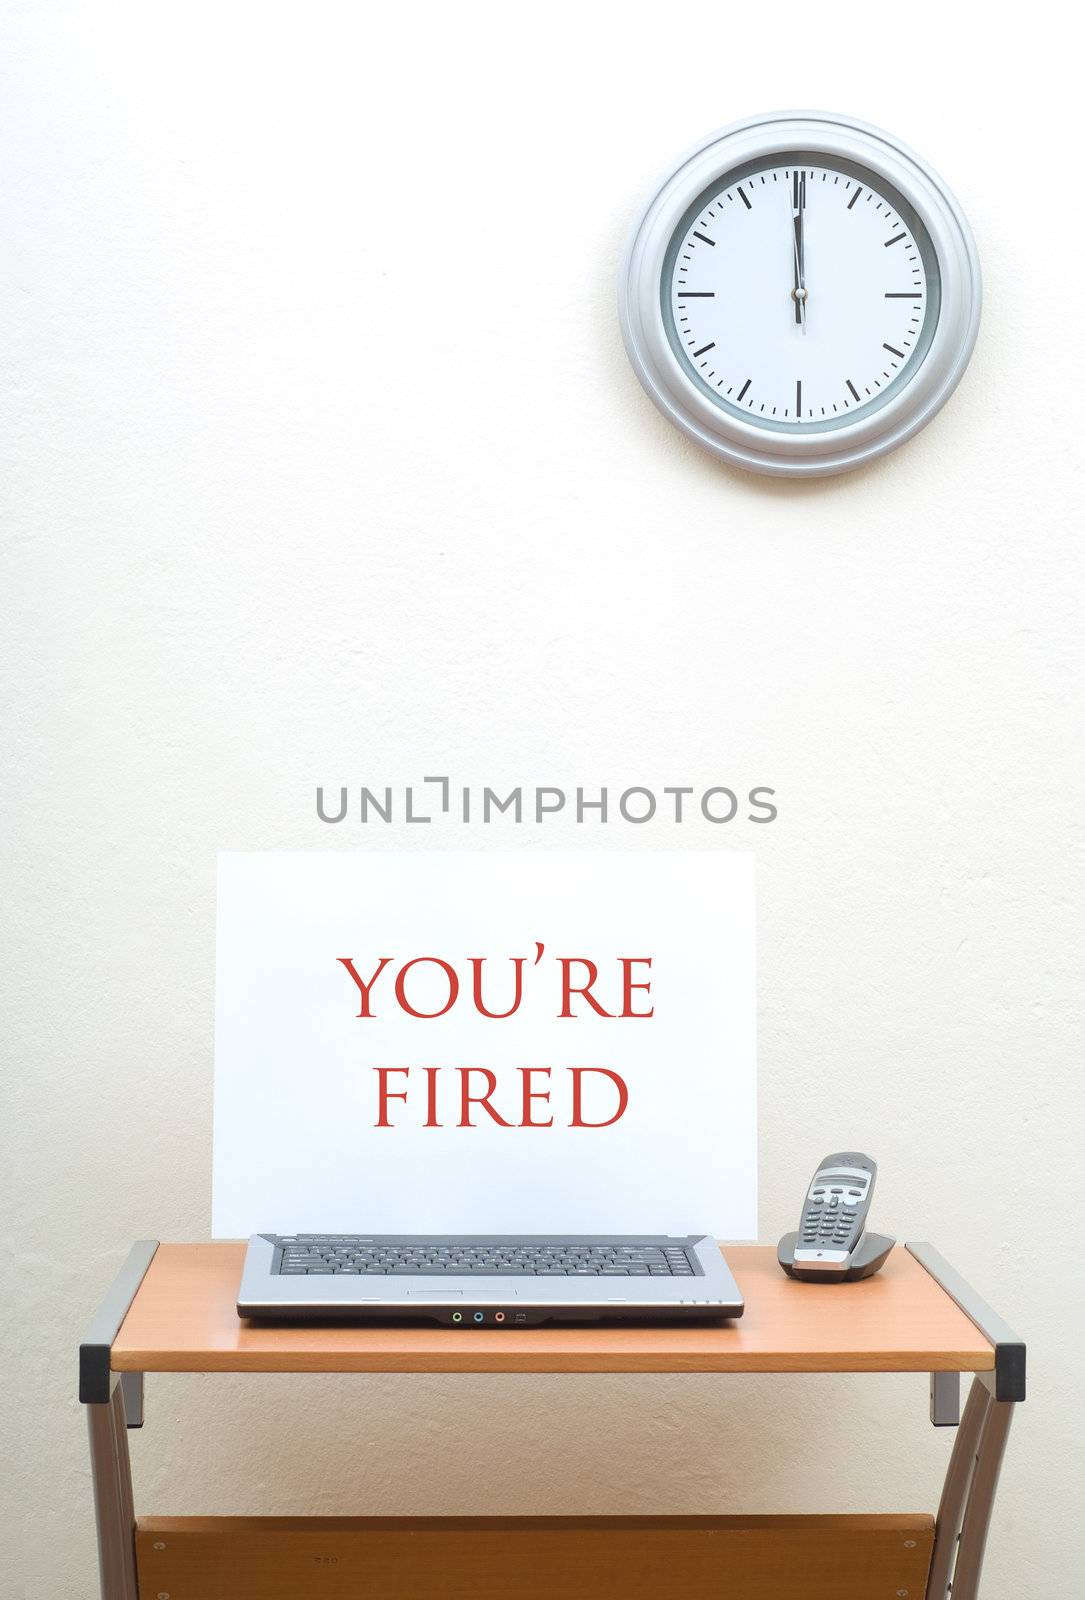 Office desk with you're fired sign on open laptop next to phone, clock on wall